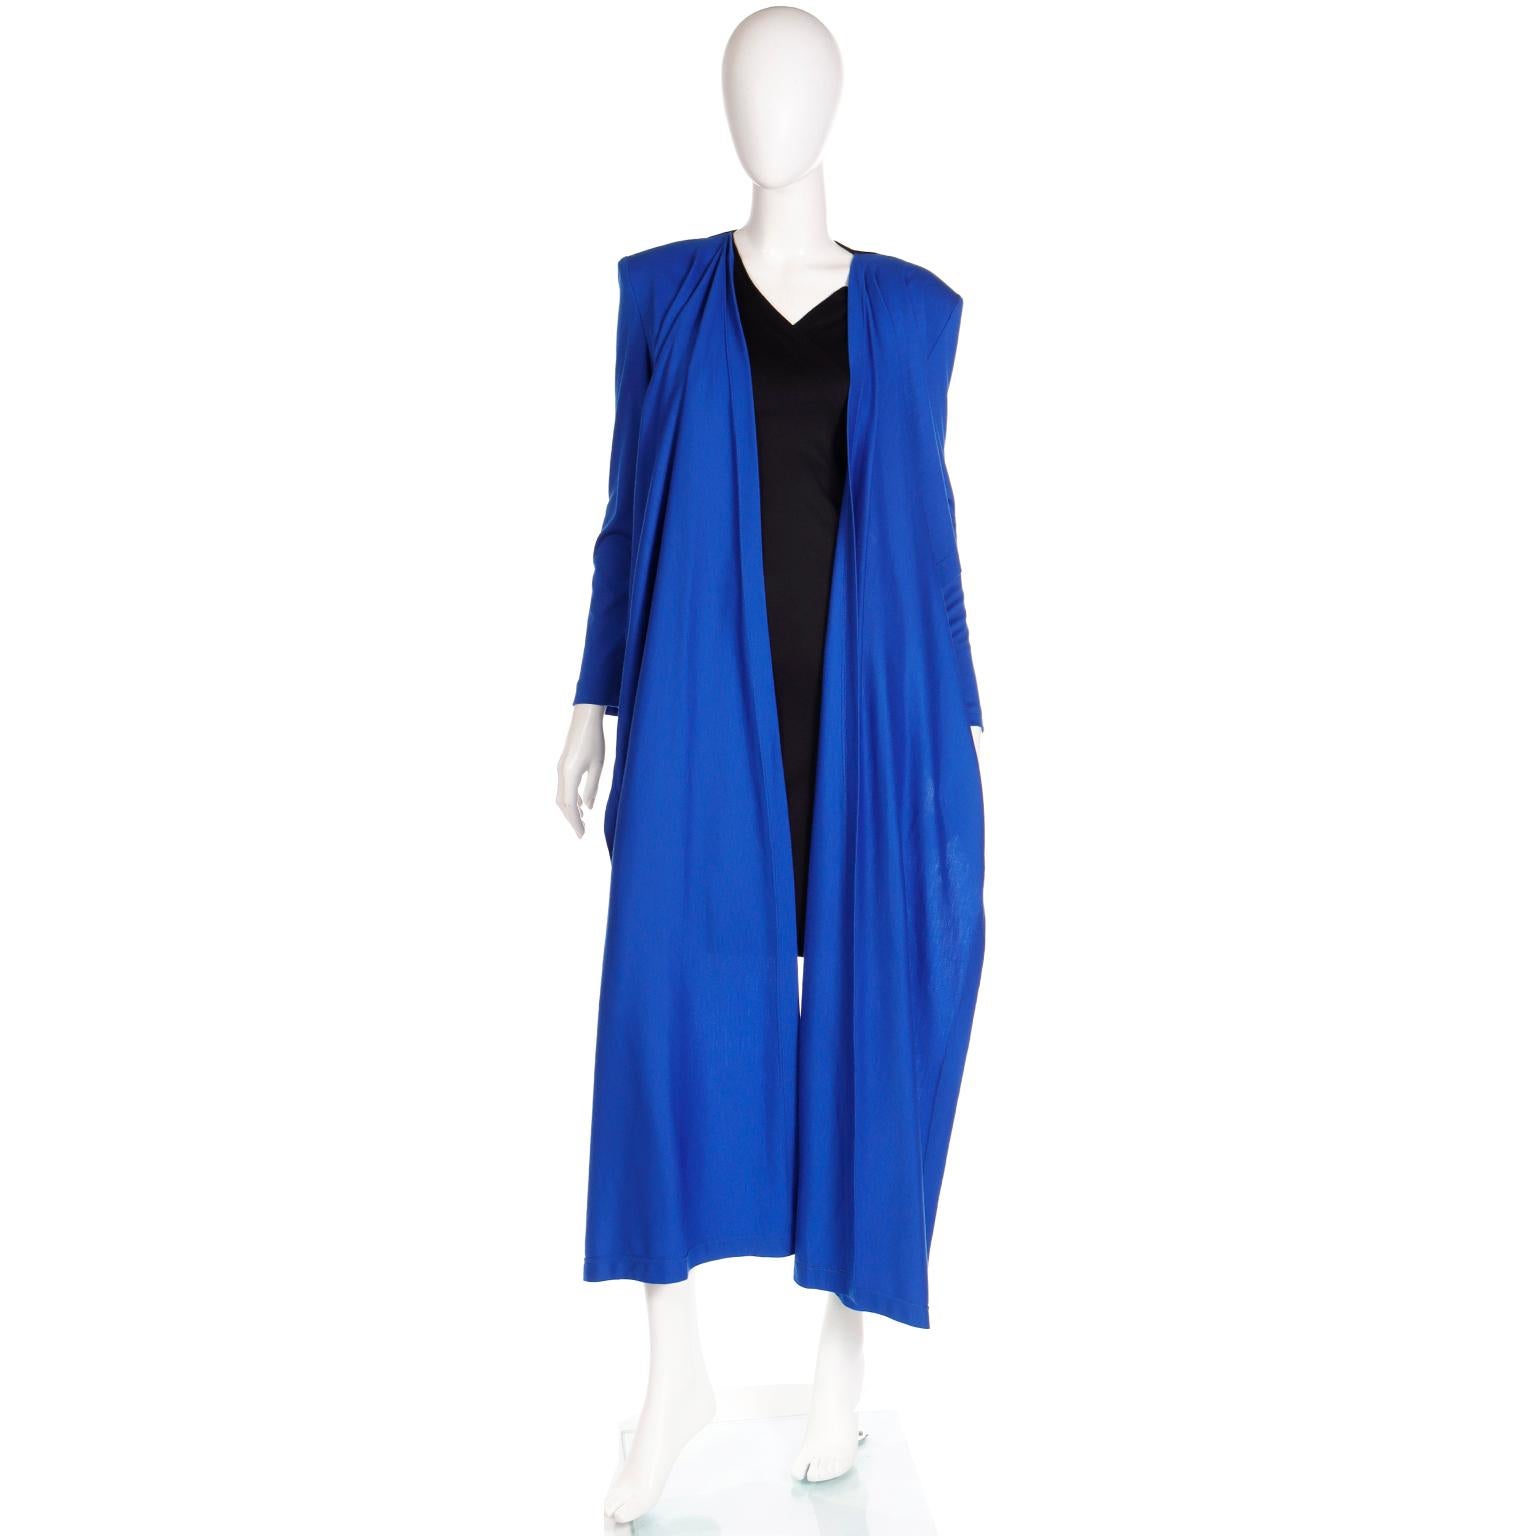 FW 1989 Patrick Kelly Runway Dress in Blue & Black Knit with Head Scarf  For Sale 9